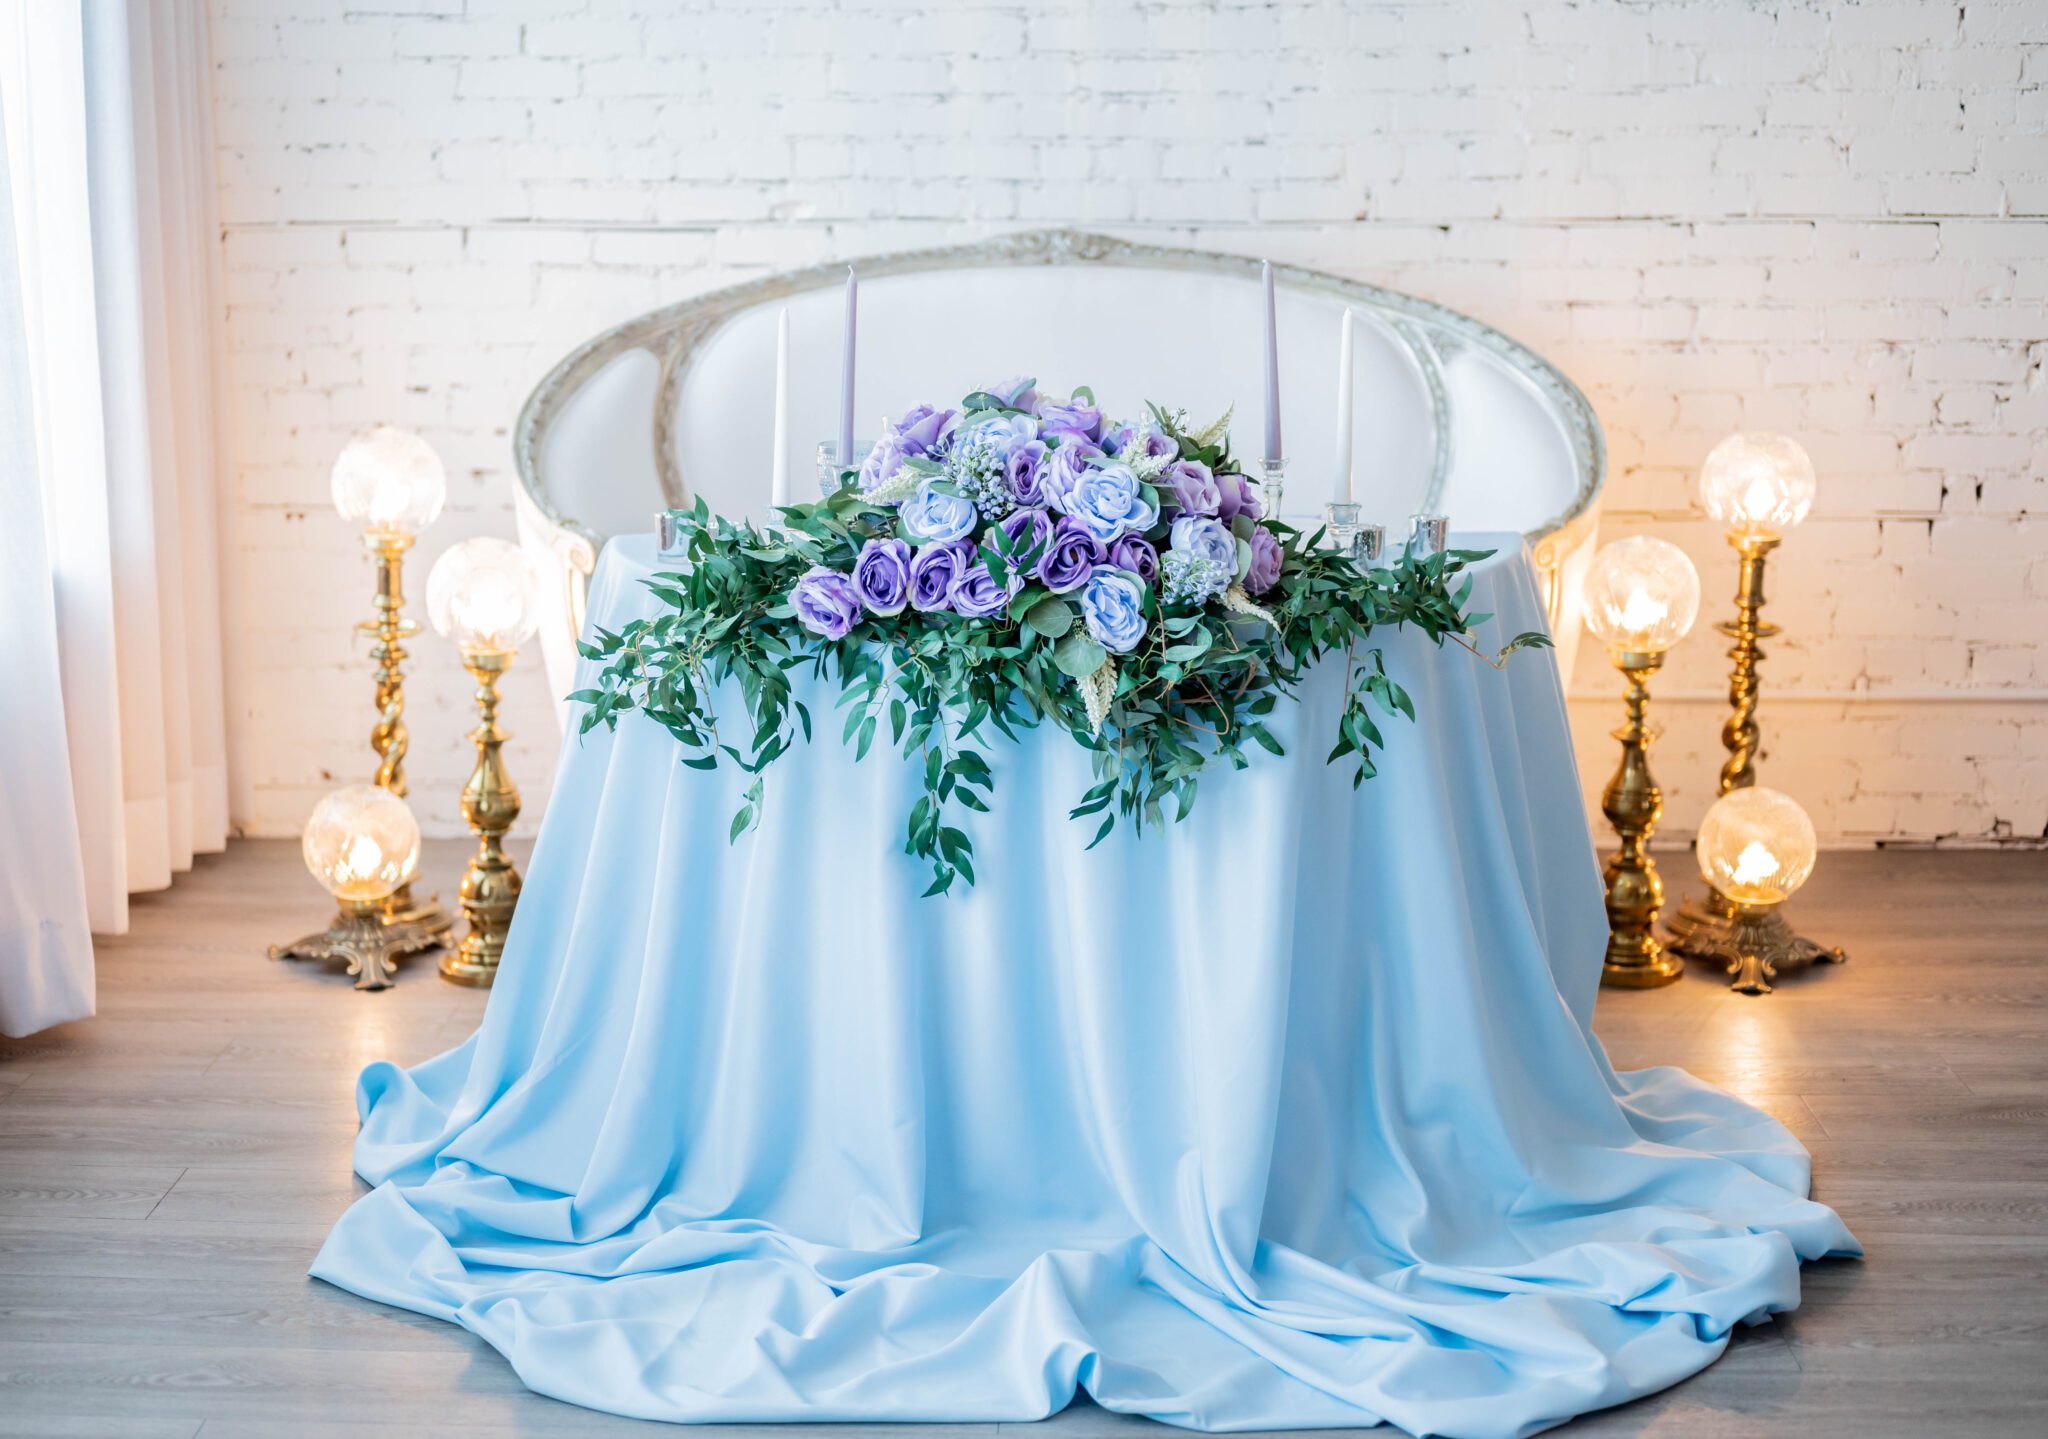 Elegant sweetheart table with lush baby blue and purple florals and greenery, vintage brass lighting for a romantic ambiance during reception, white and silver love seat for bride and groom